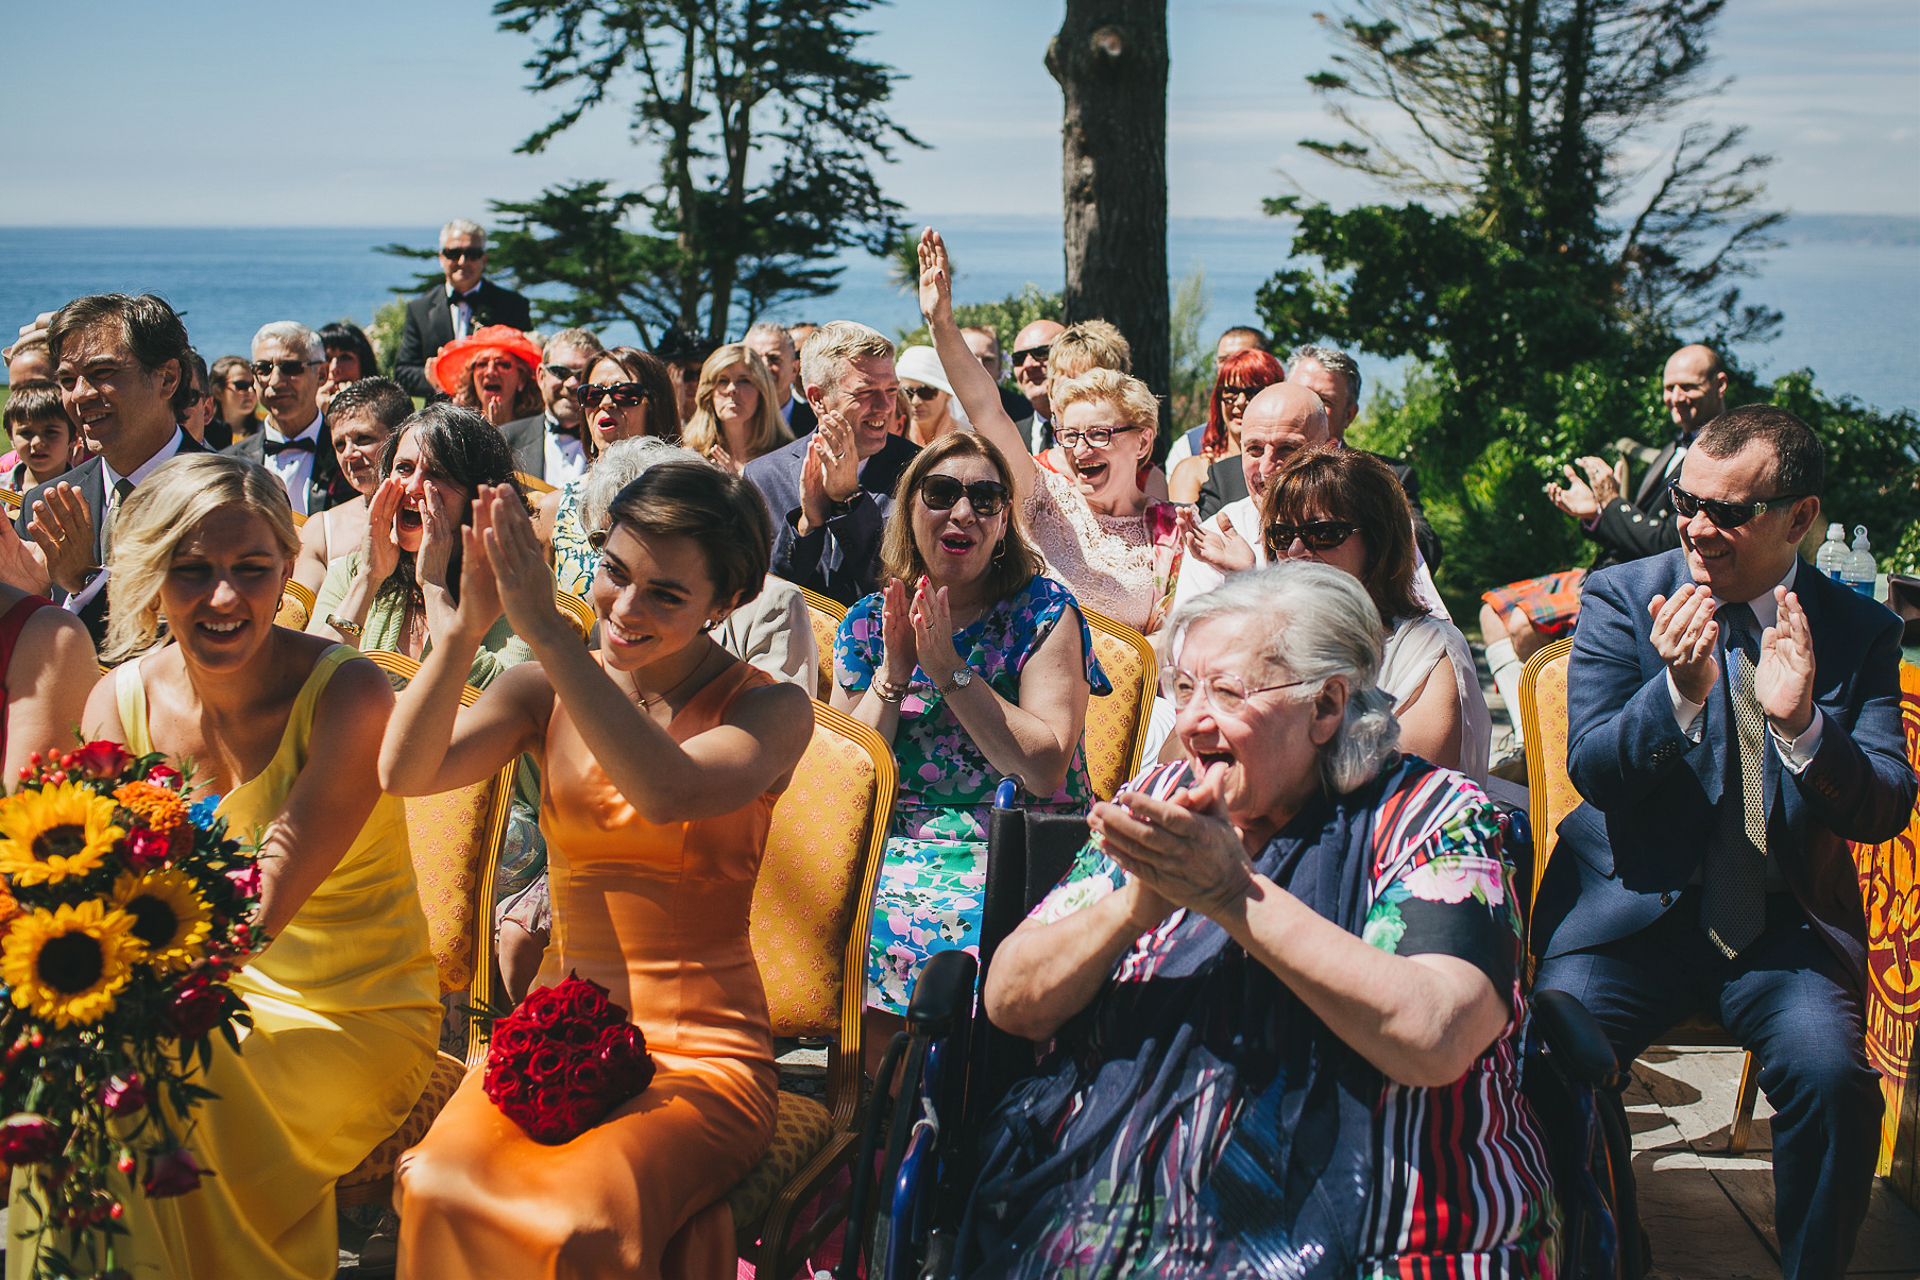 Wedding guests clapping and cheering with the sea behind